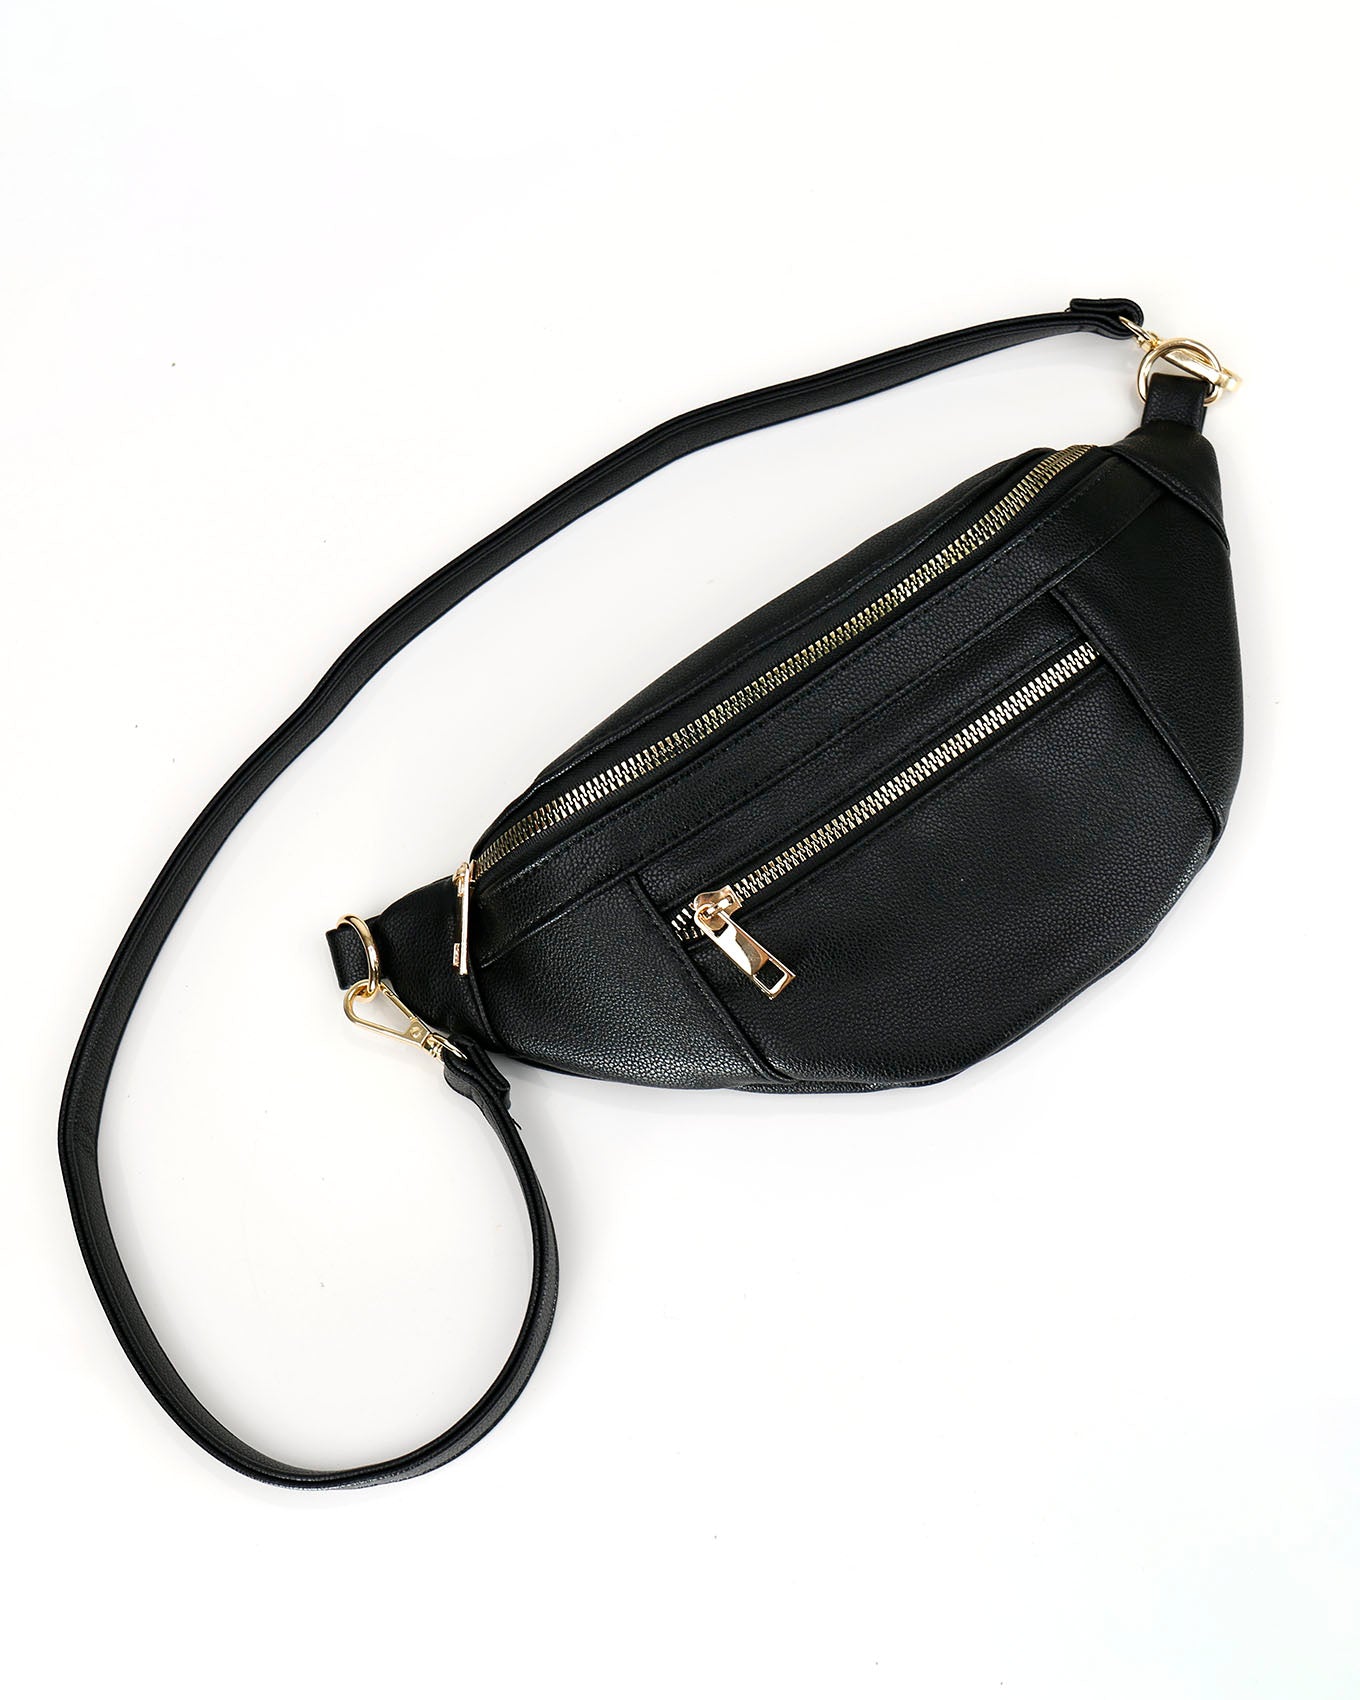 Stock shot of Black Faux Leather Belt Bag with Guitar Strap